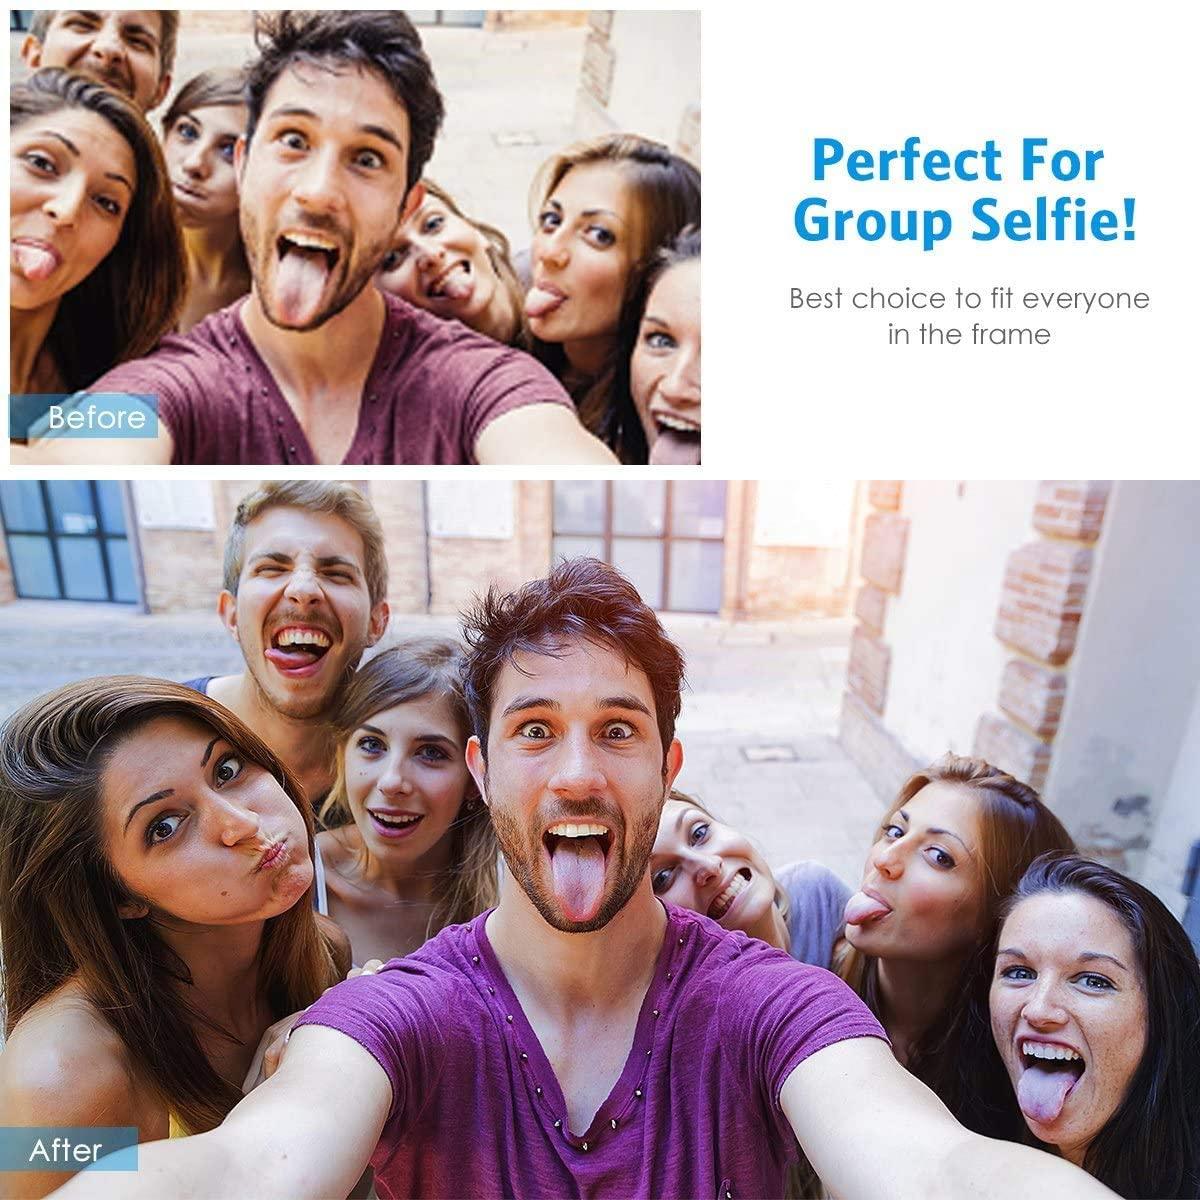 Perfect for group selfie photo